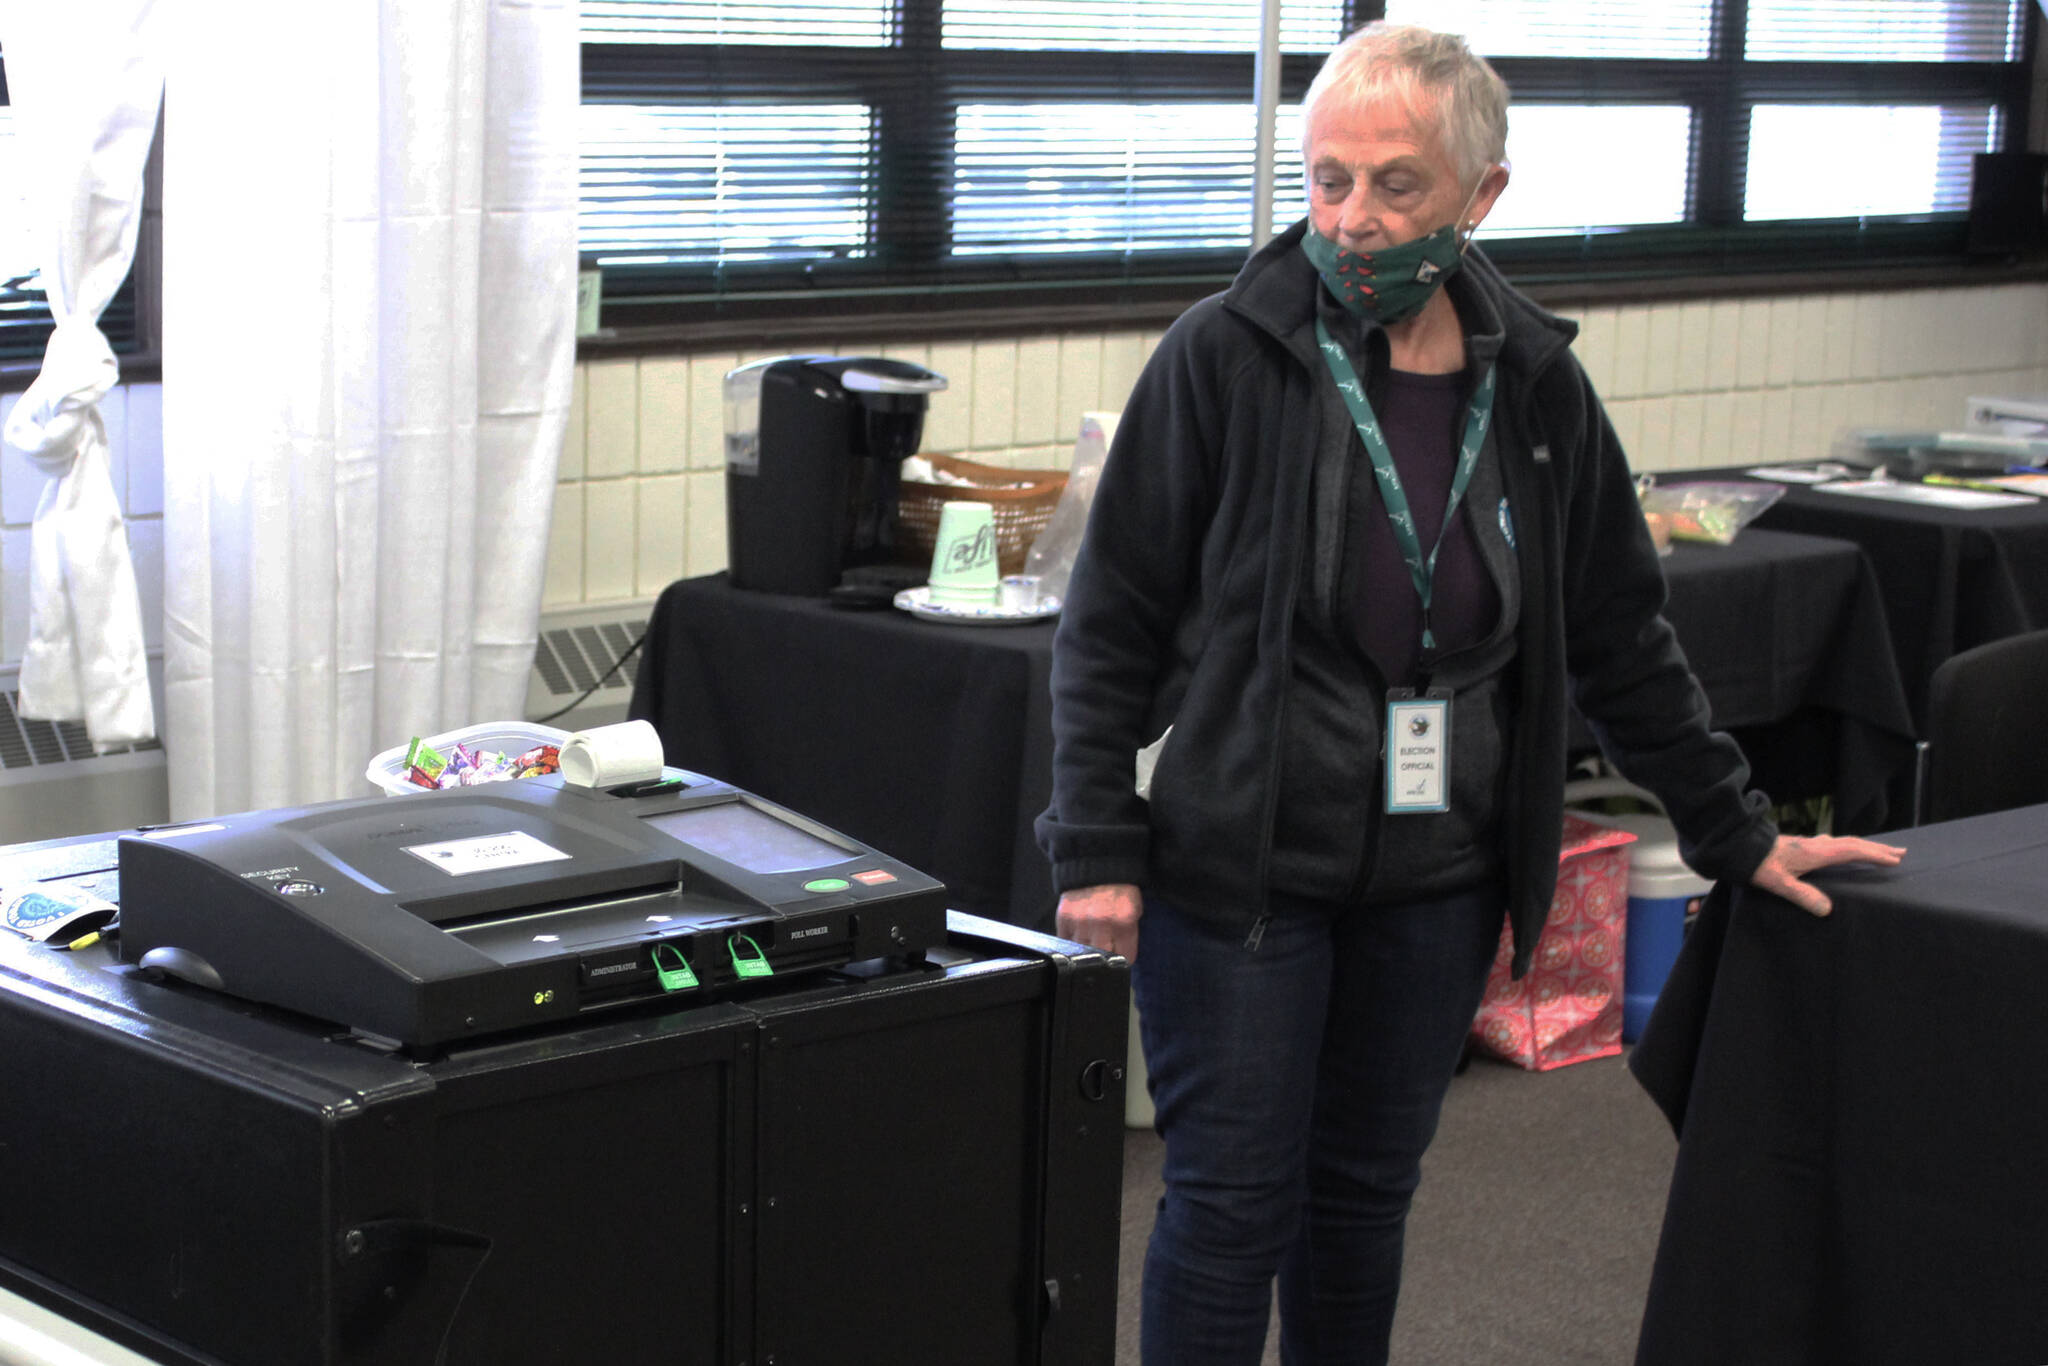 Anna Traylor oversees voting equipment at the Soldotna Regional Sports Complex on Tuesday, Oct. 5, 2021 in Soldotna, Alaska. (Ashlyn O’Hara/Peninsula Clarion)